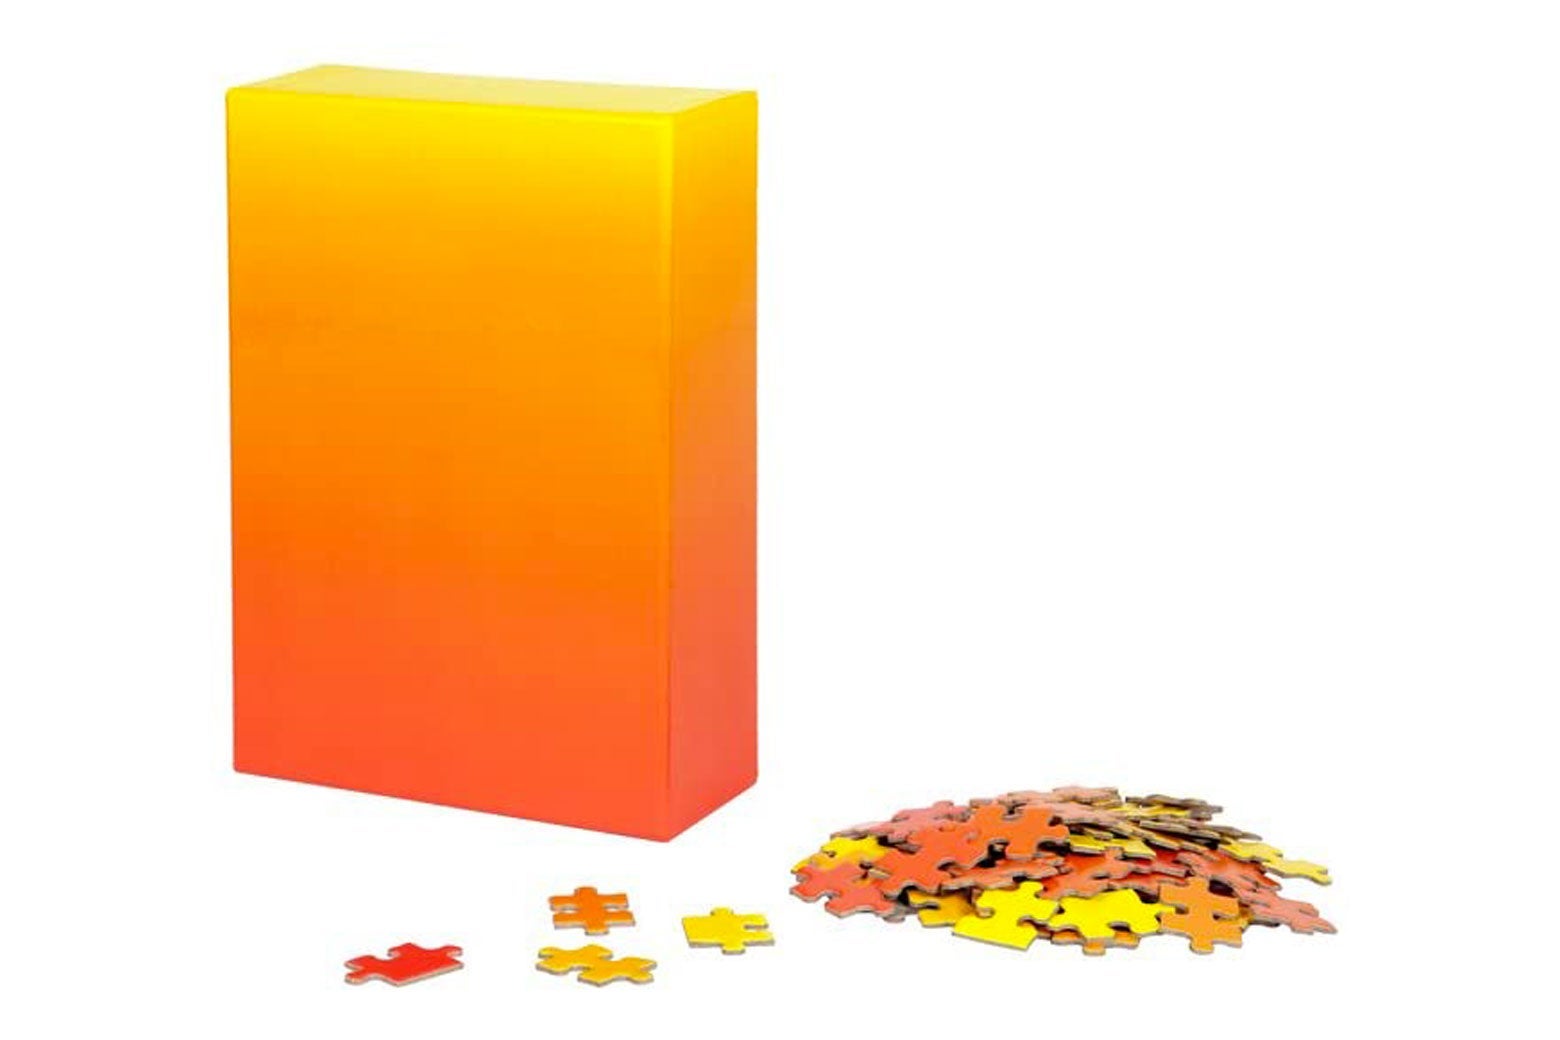 Puzzle box and a pile of puzzle pieces